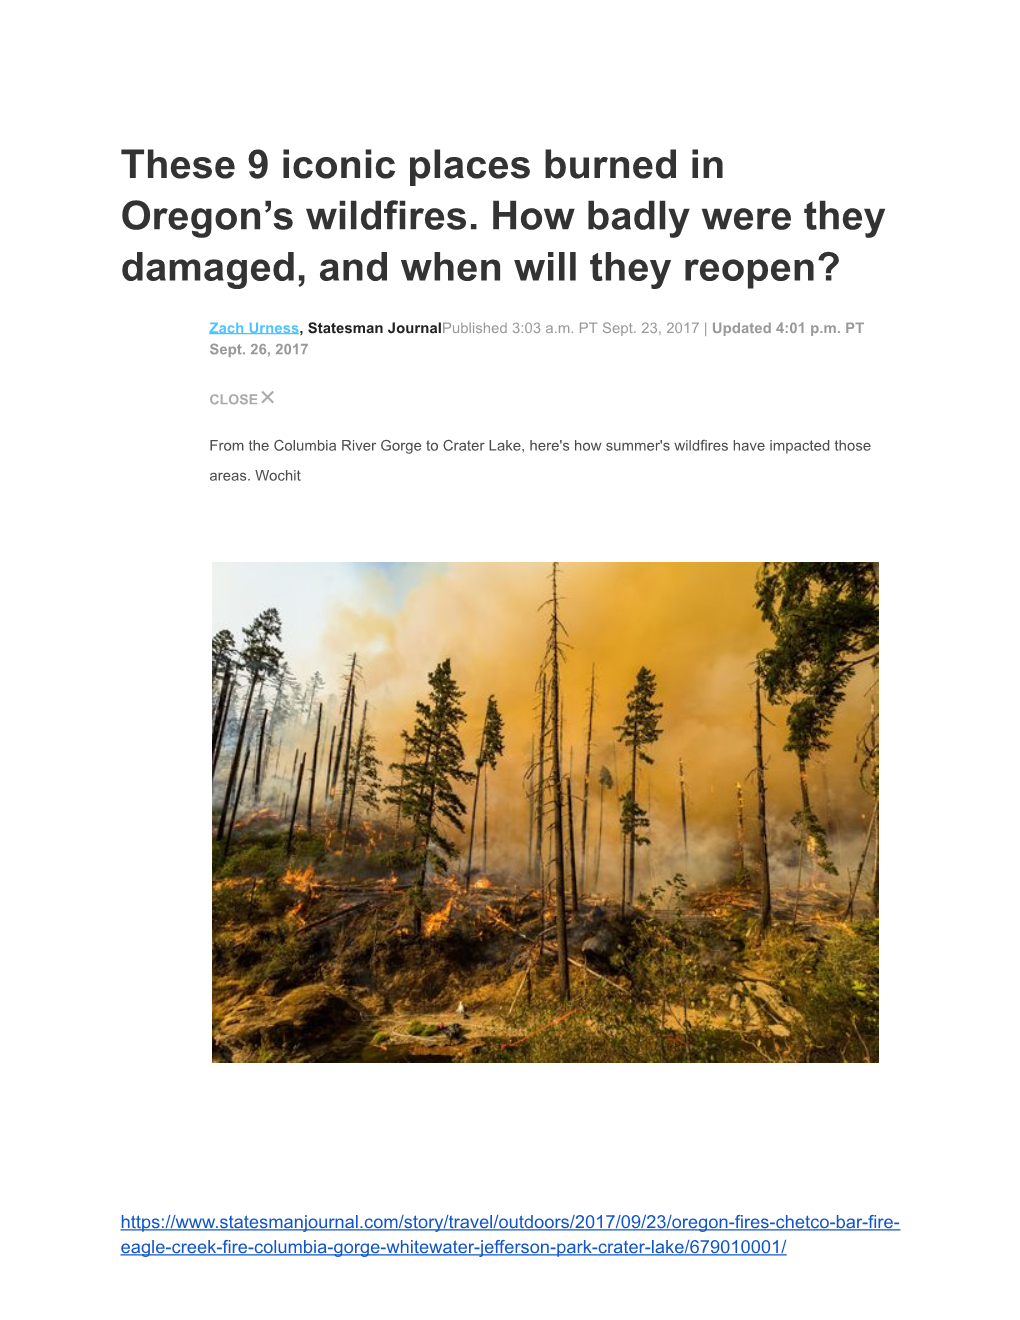 These 9 Iconic Places Burned in Oregon's Wildfires. How Badly Were